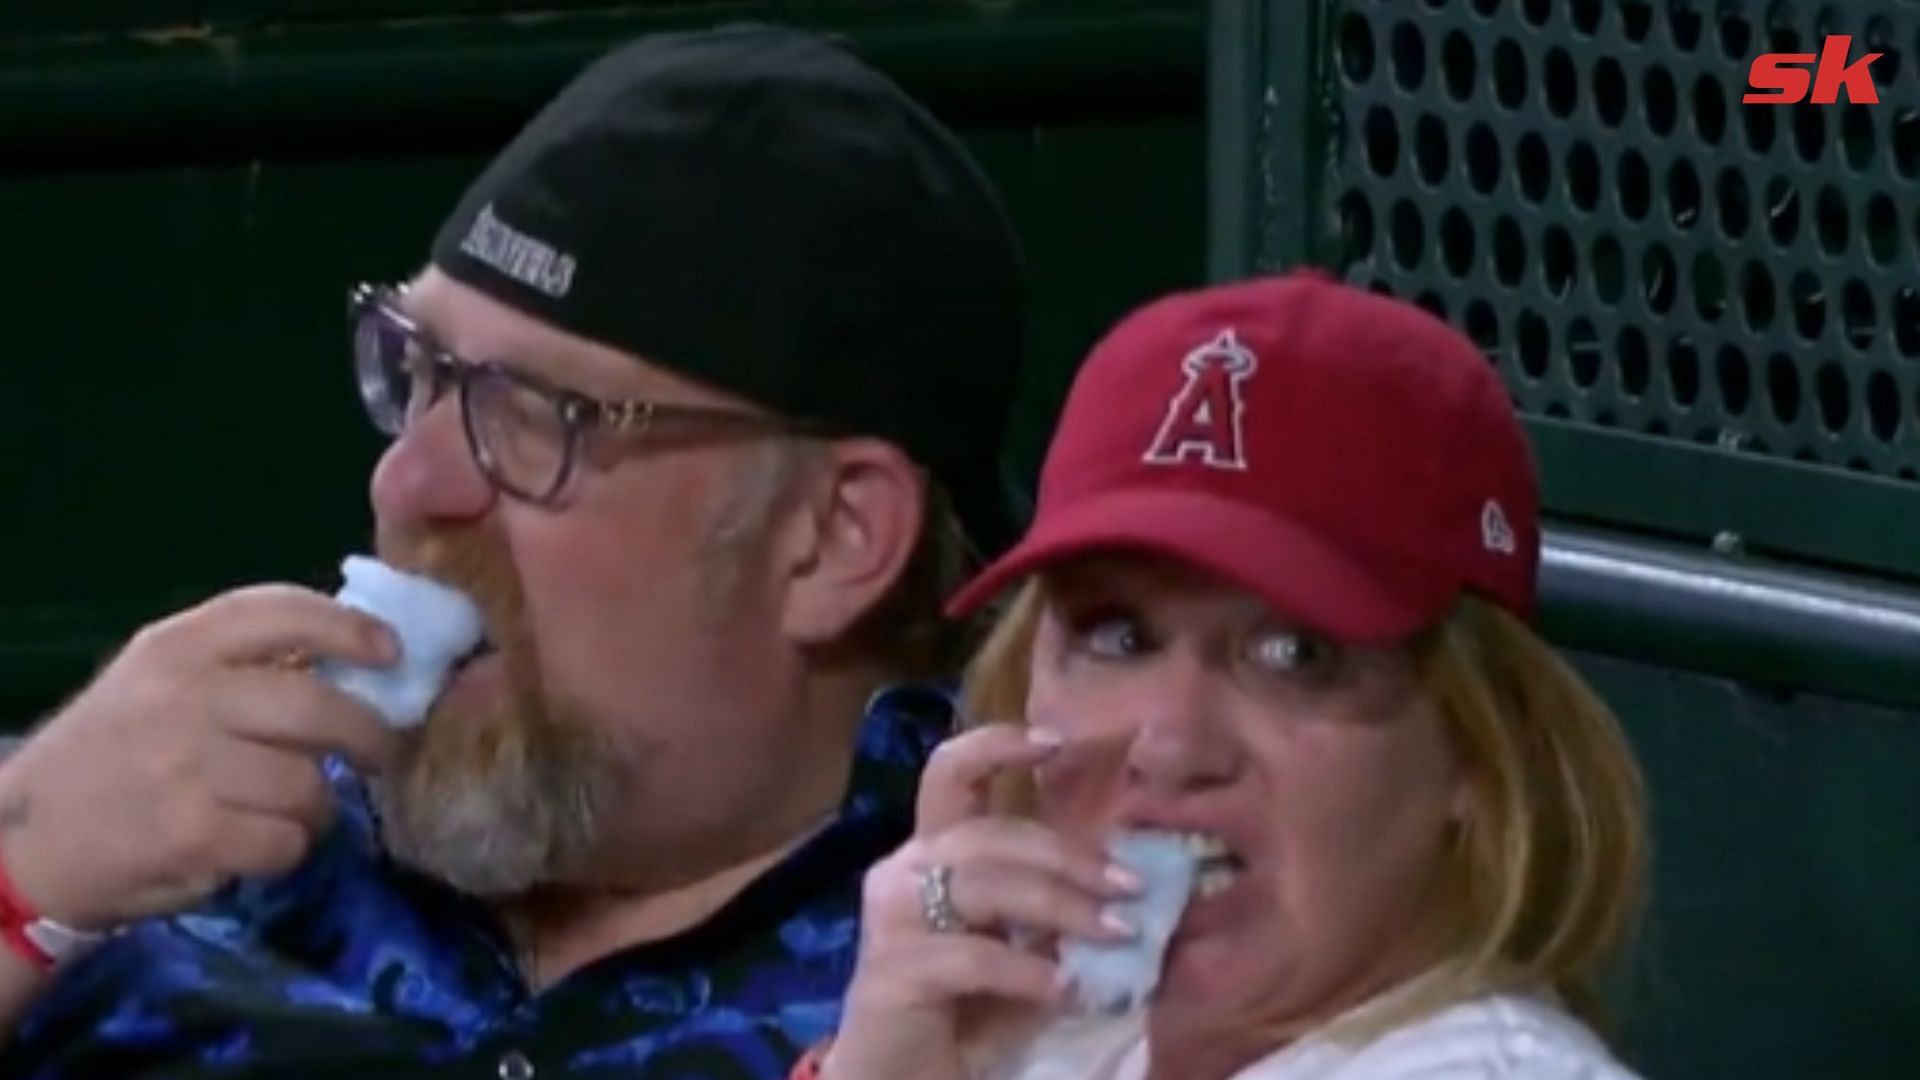 MLB fans annoyed by broadcaster continuing to show couple eating cotton ...